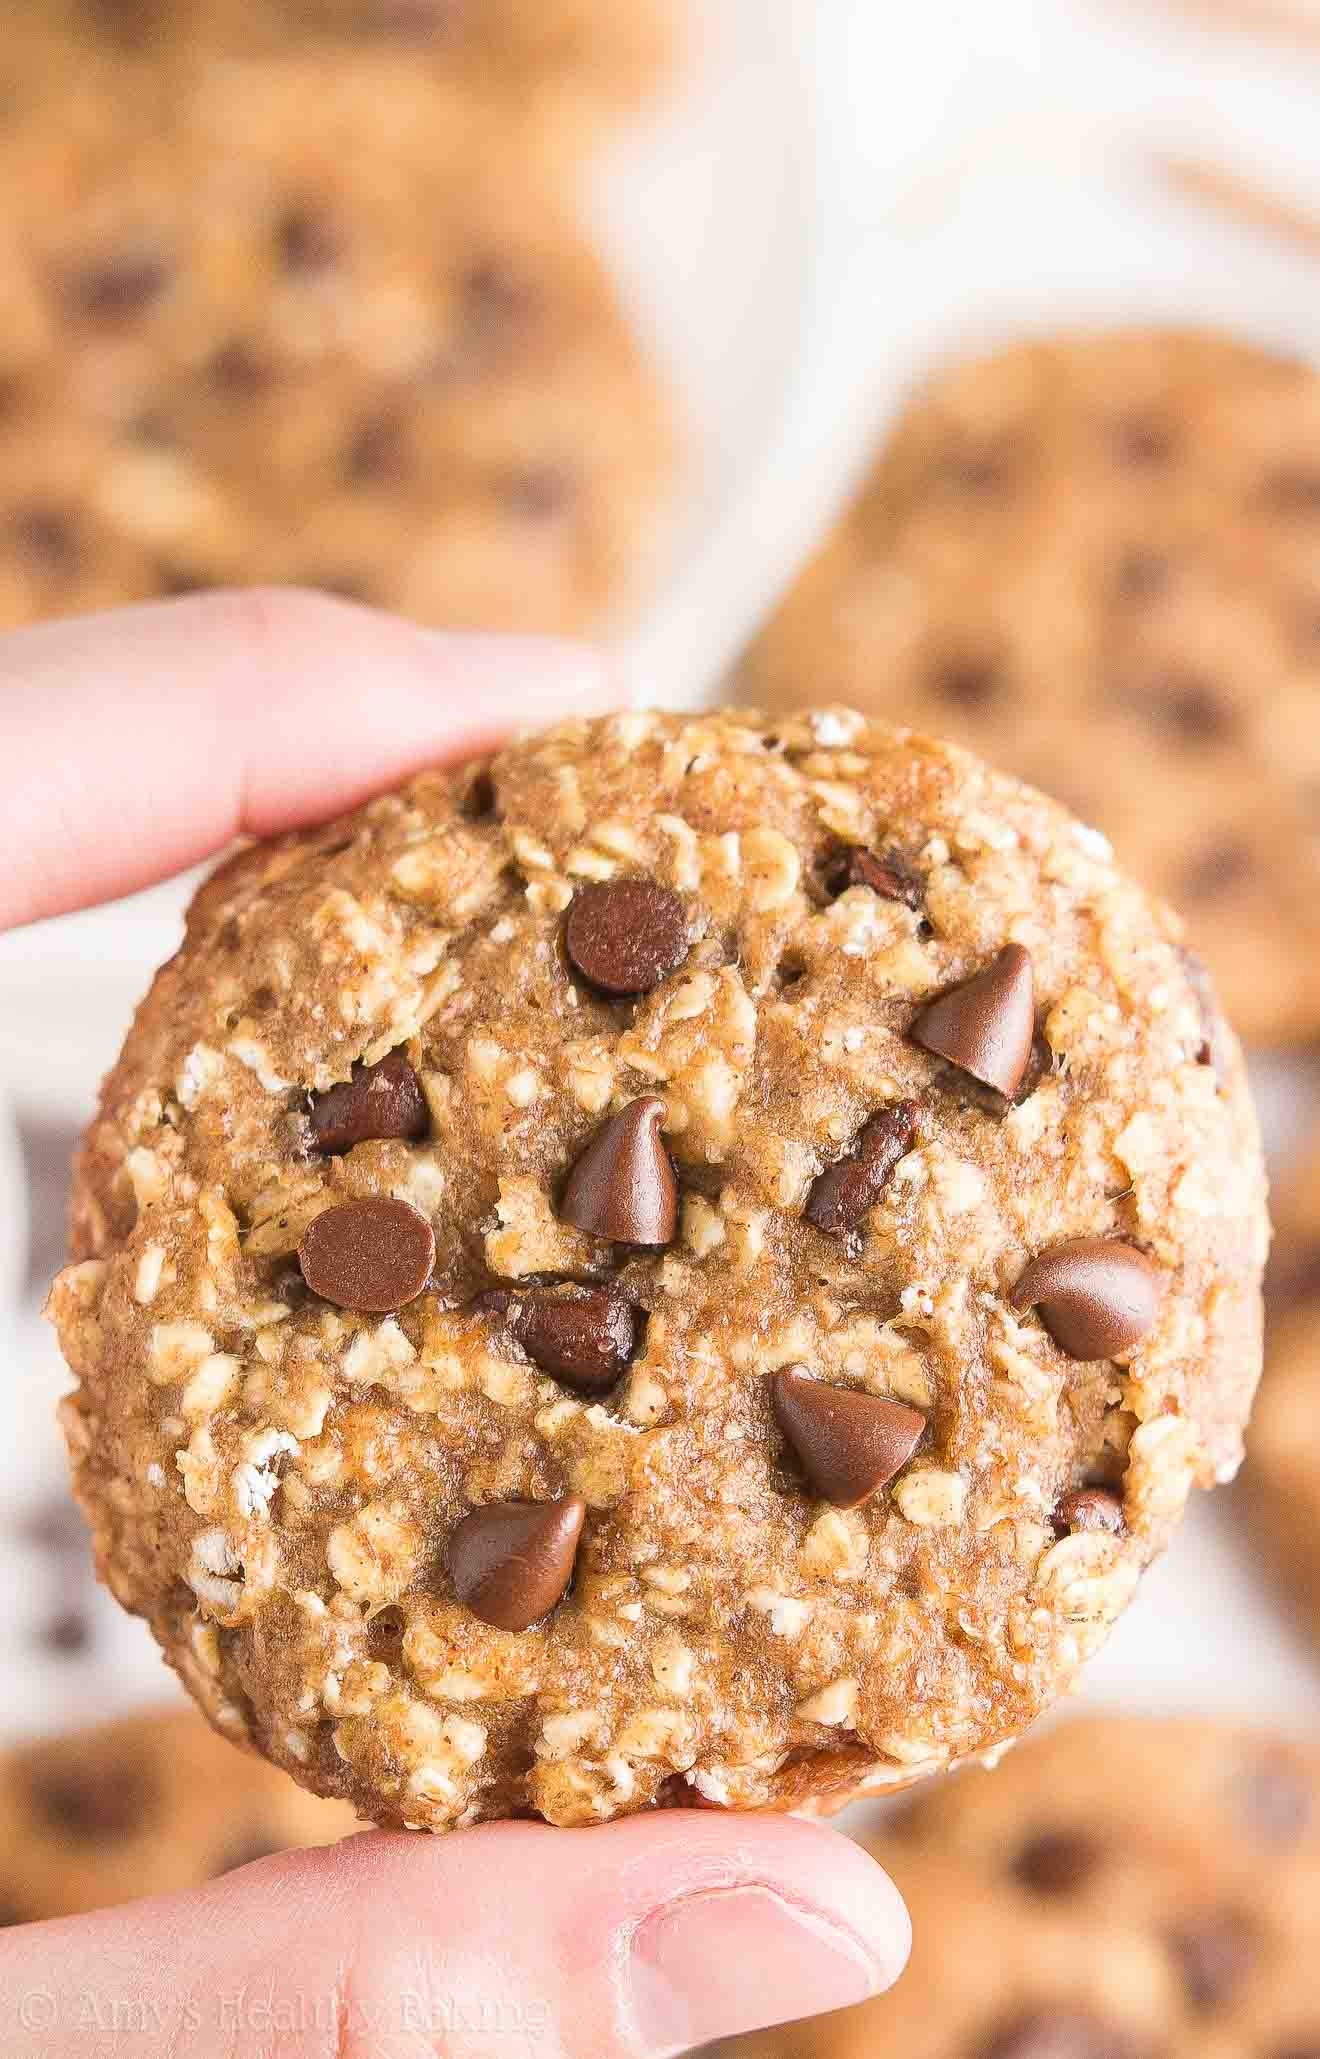 Healthy Peanut Butter Chocolate Chip Cookies
 Healthy Chocolate Chip Peanut Butter Oatmeal Breakfast